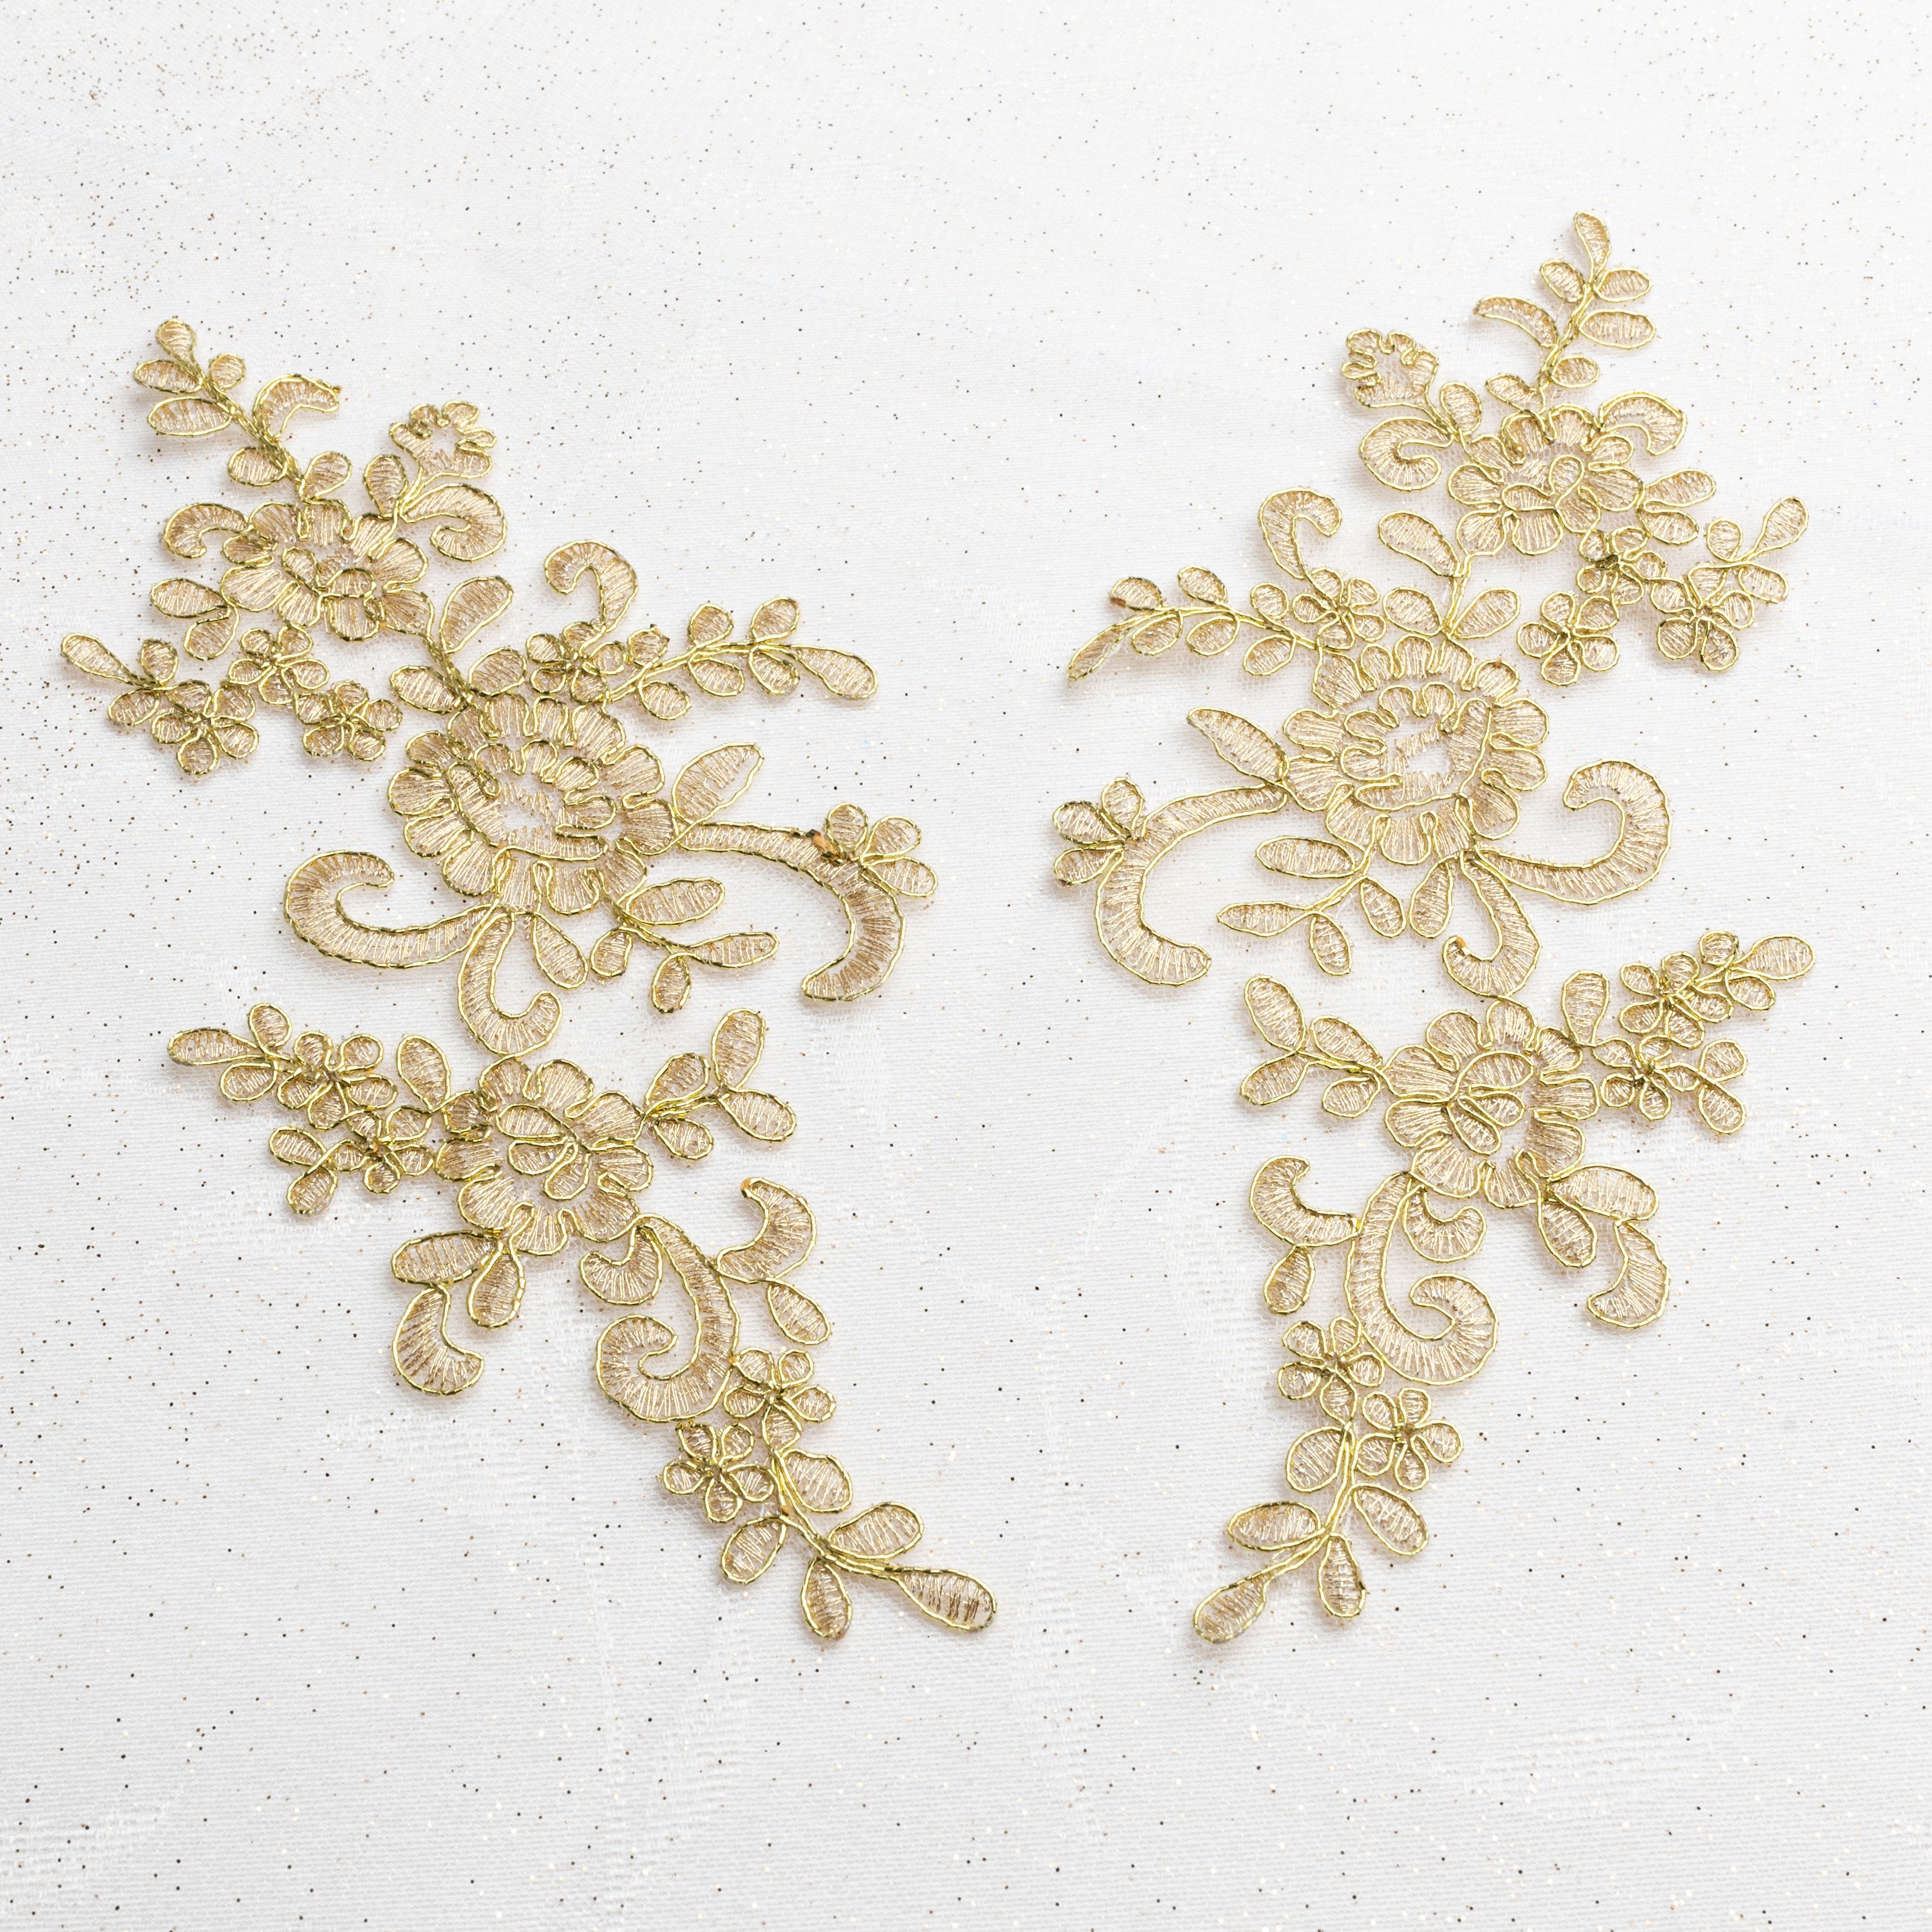 Mirrored pair of embroidered gold appliques edged with metallic gold cord. The appliques are laying flat on a white background.